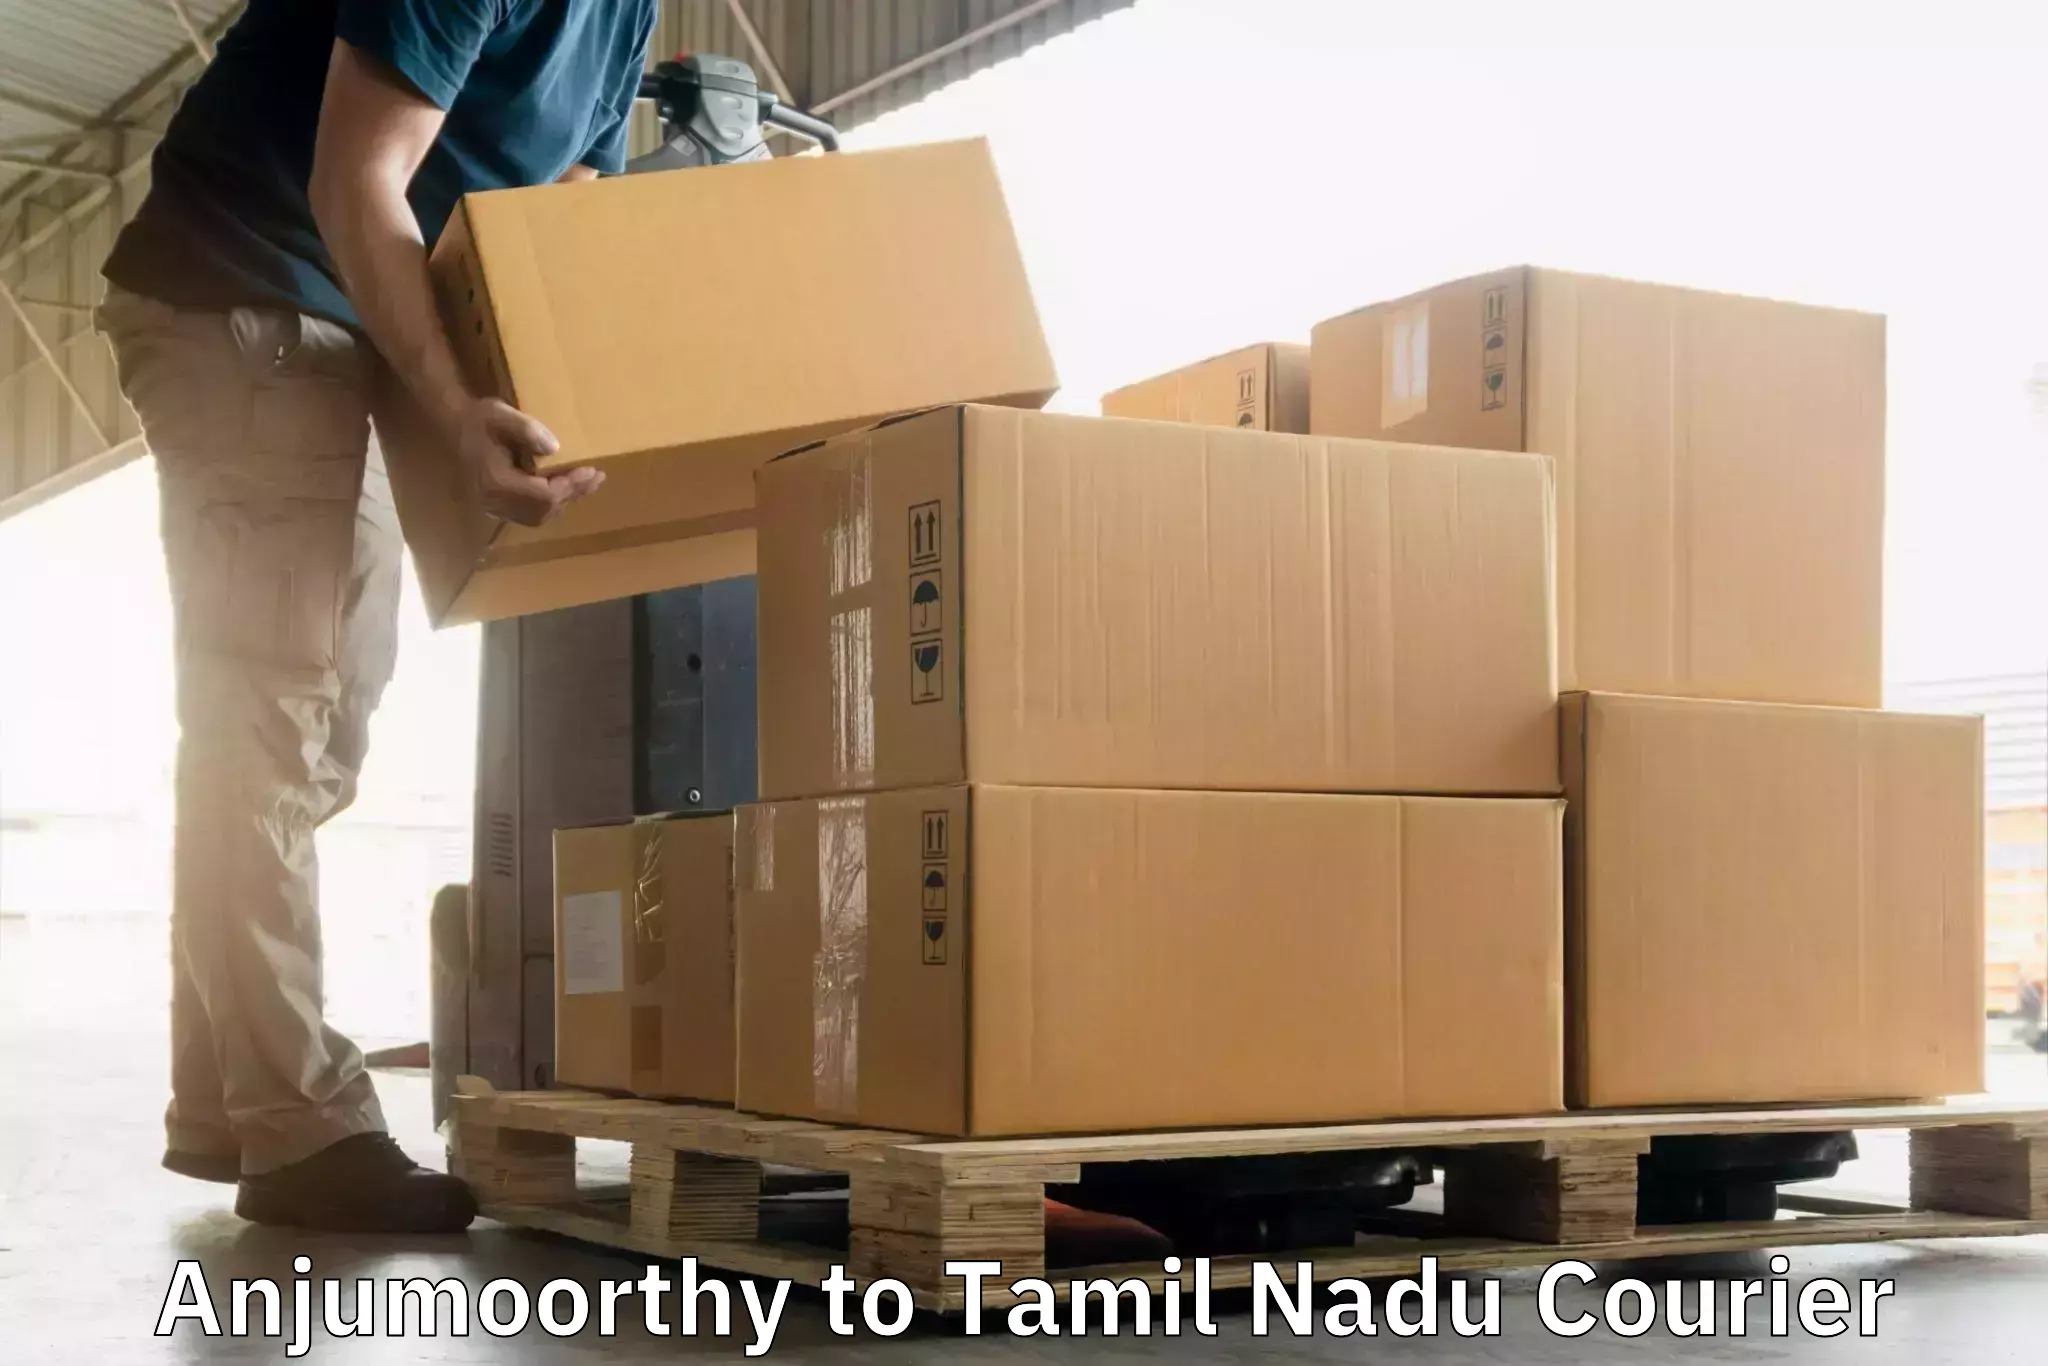 Parcel delivery automation Anjumoorthy to Chennai Port